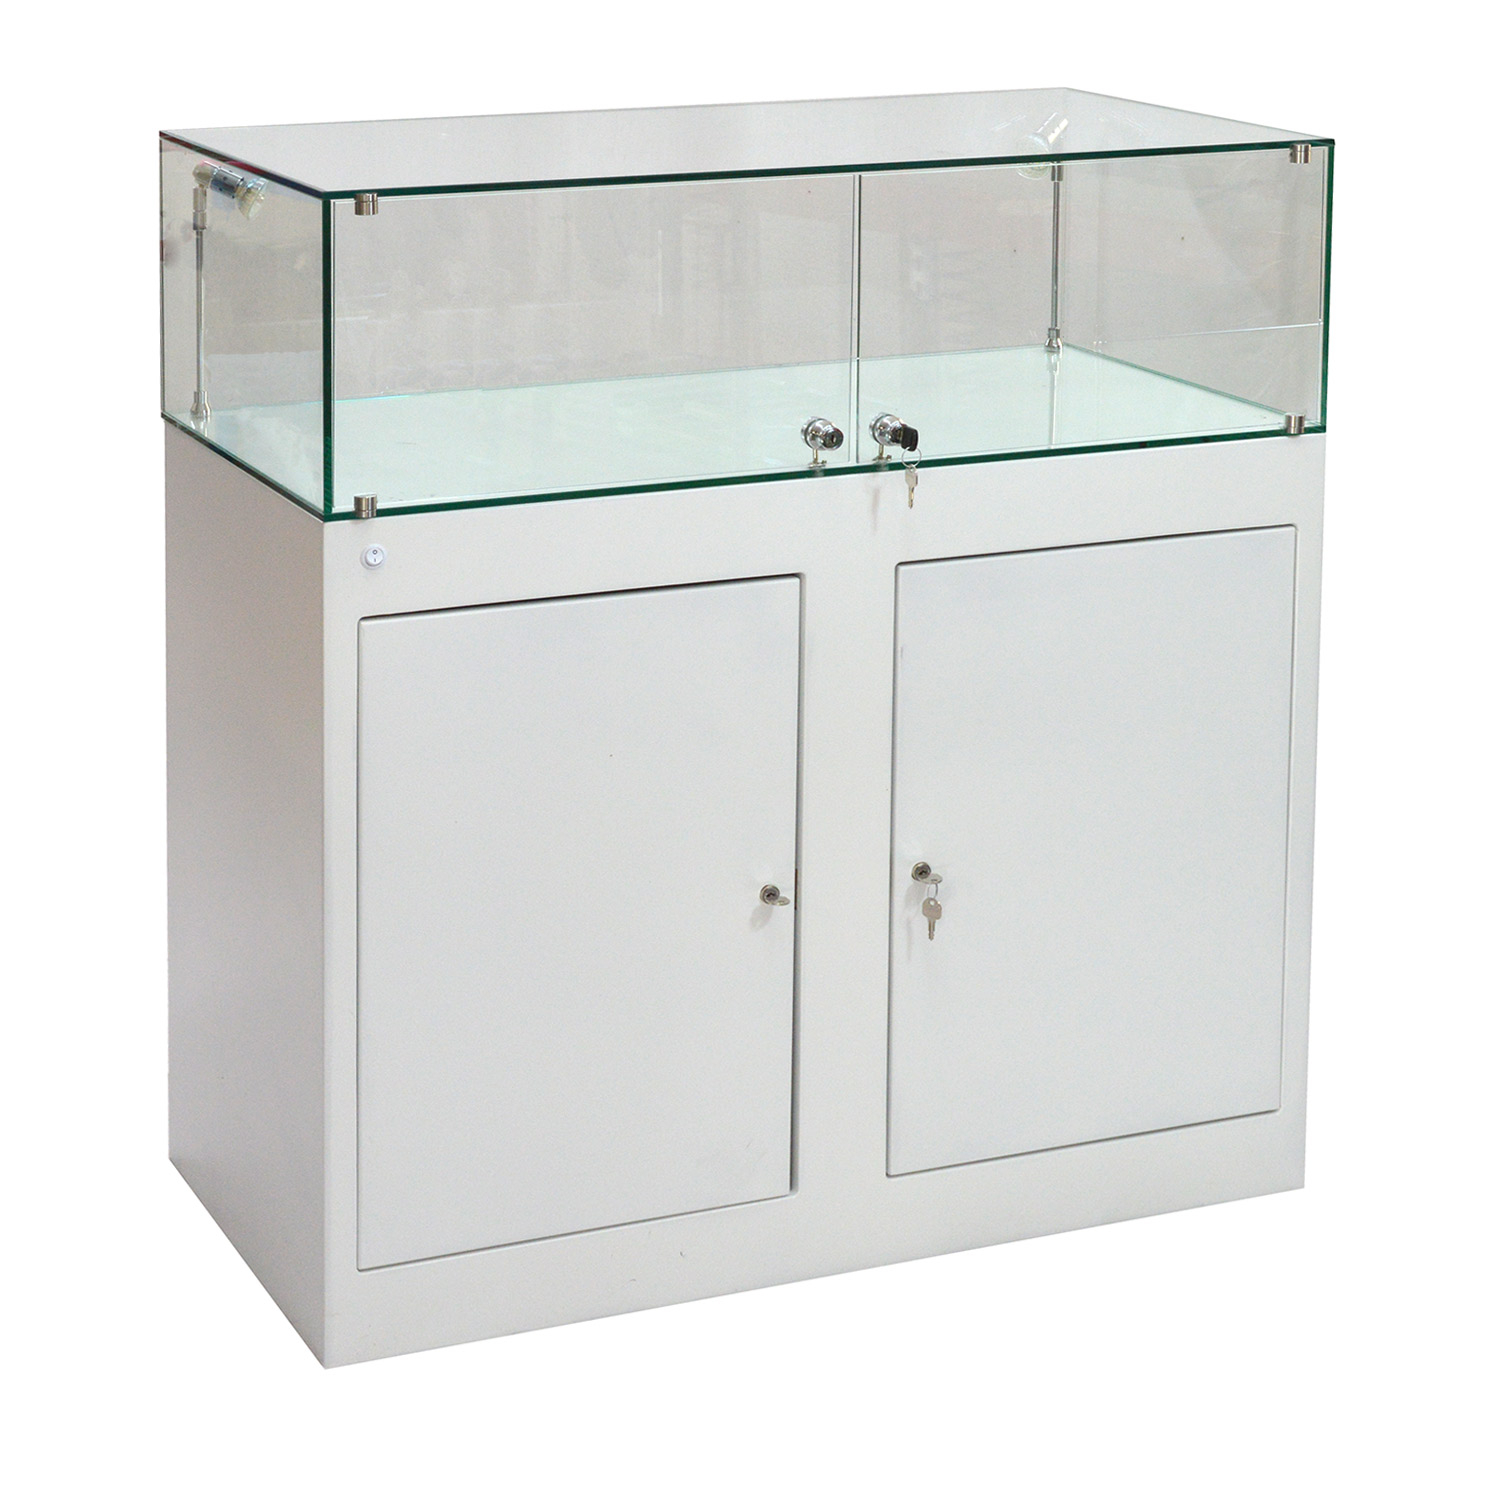 Locked Display Cabinets Best Cabinets Decoration intended for sizing 1500 X 1500